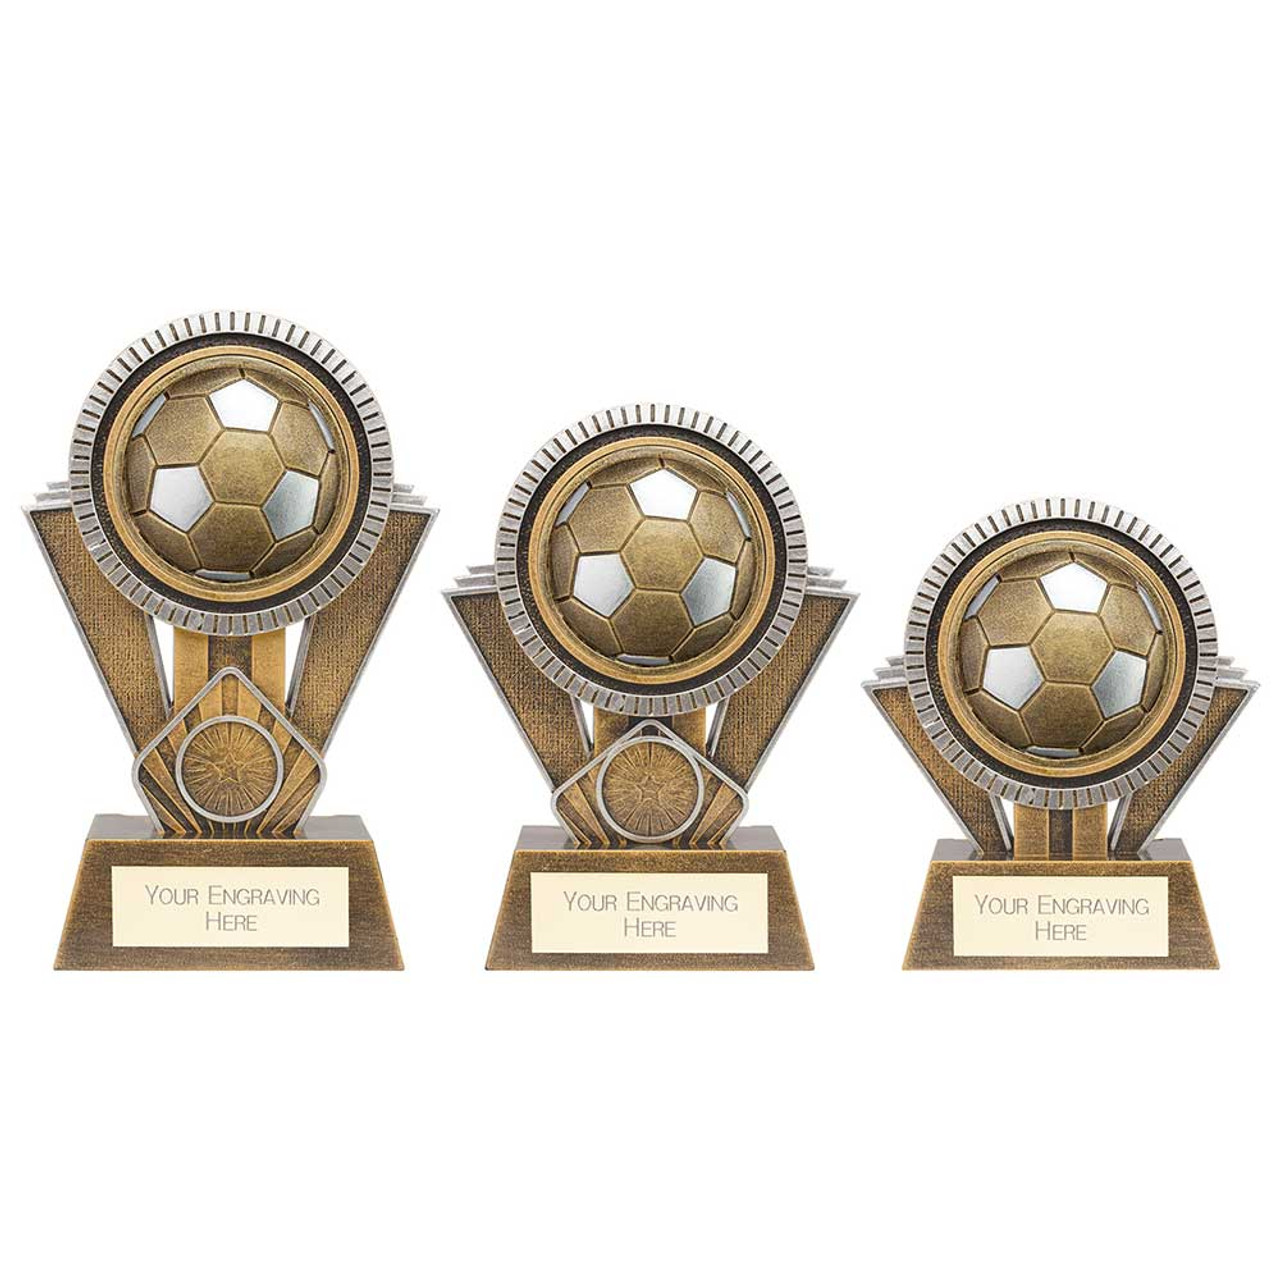 Apex Ikon Football Competition Trophy in 3 sizes